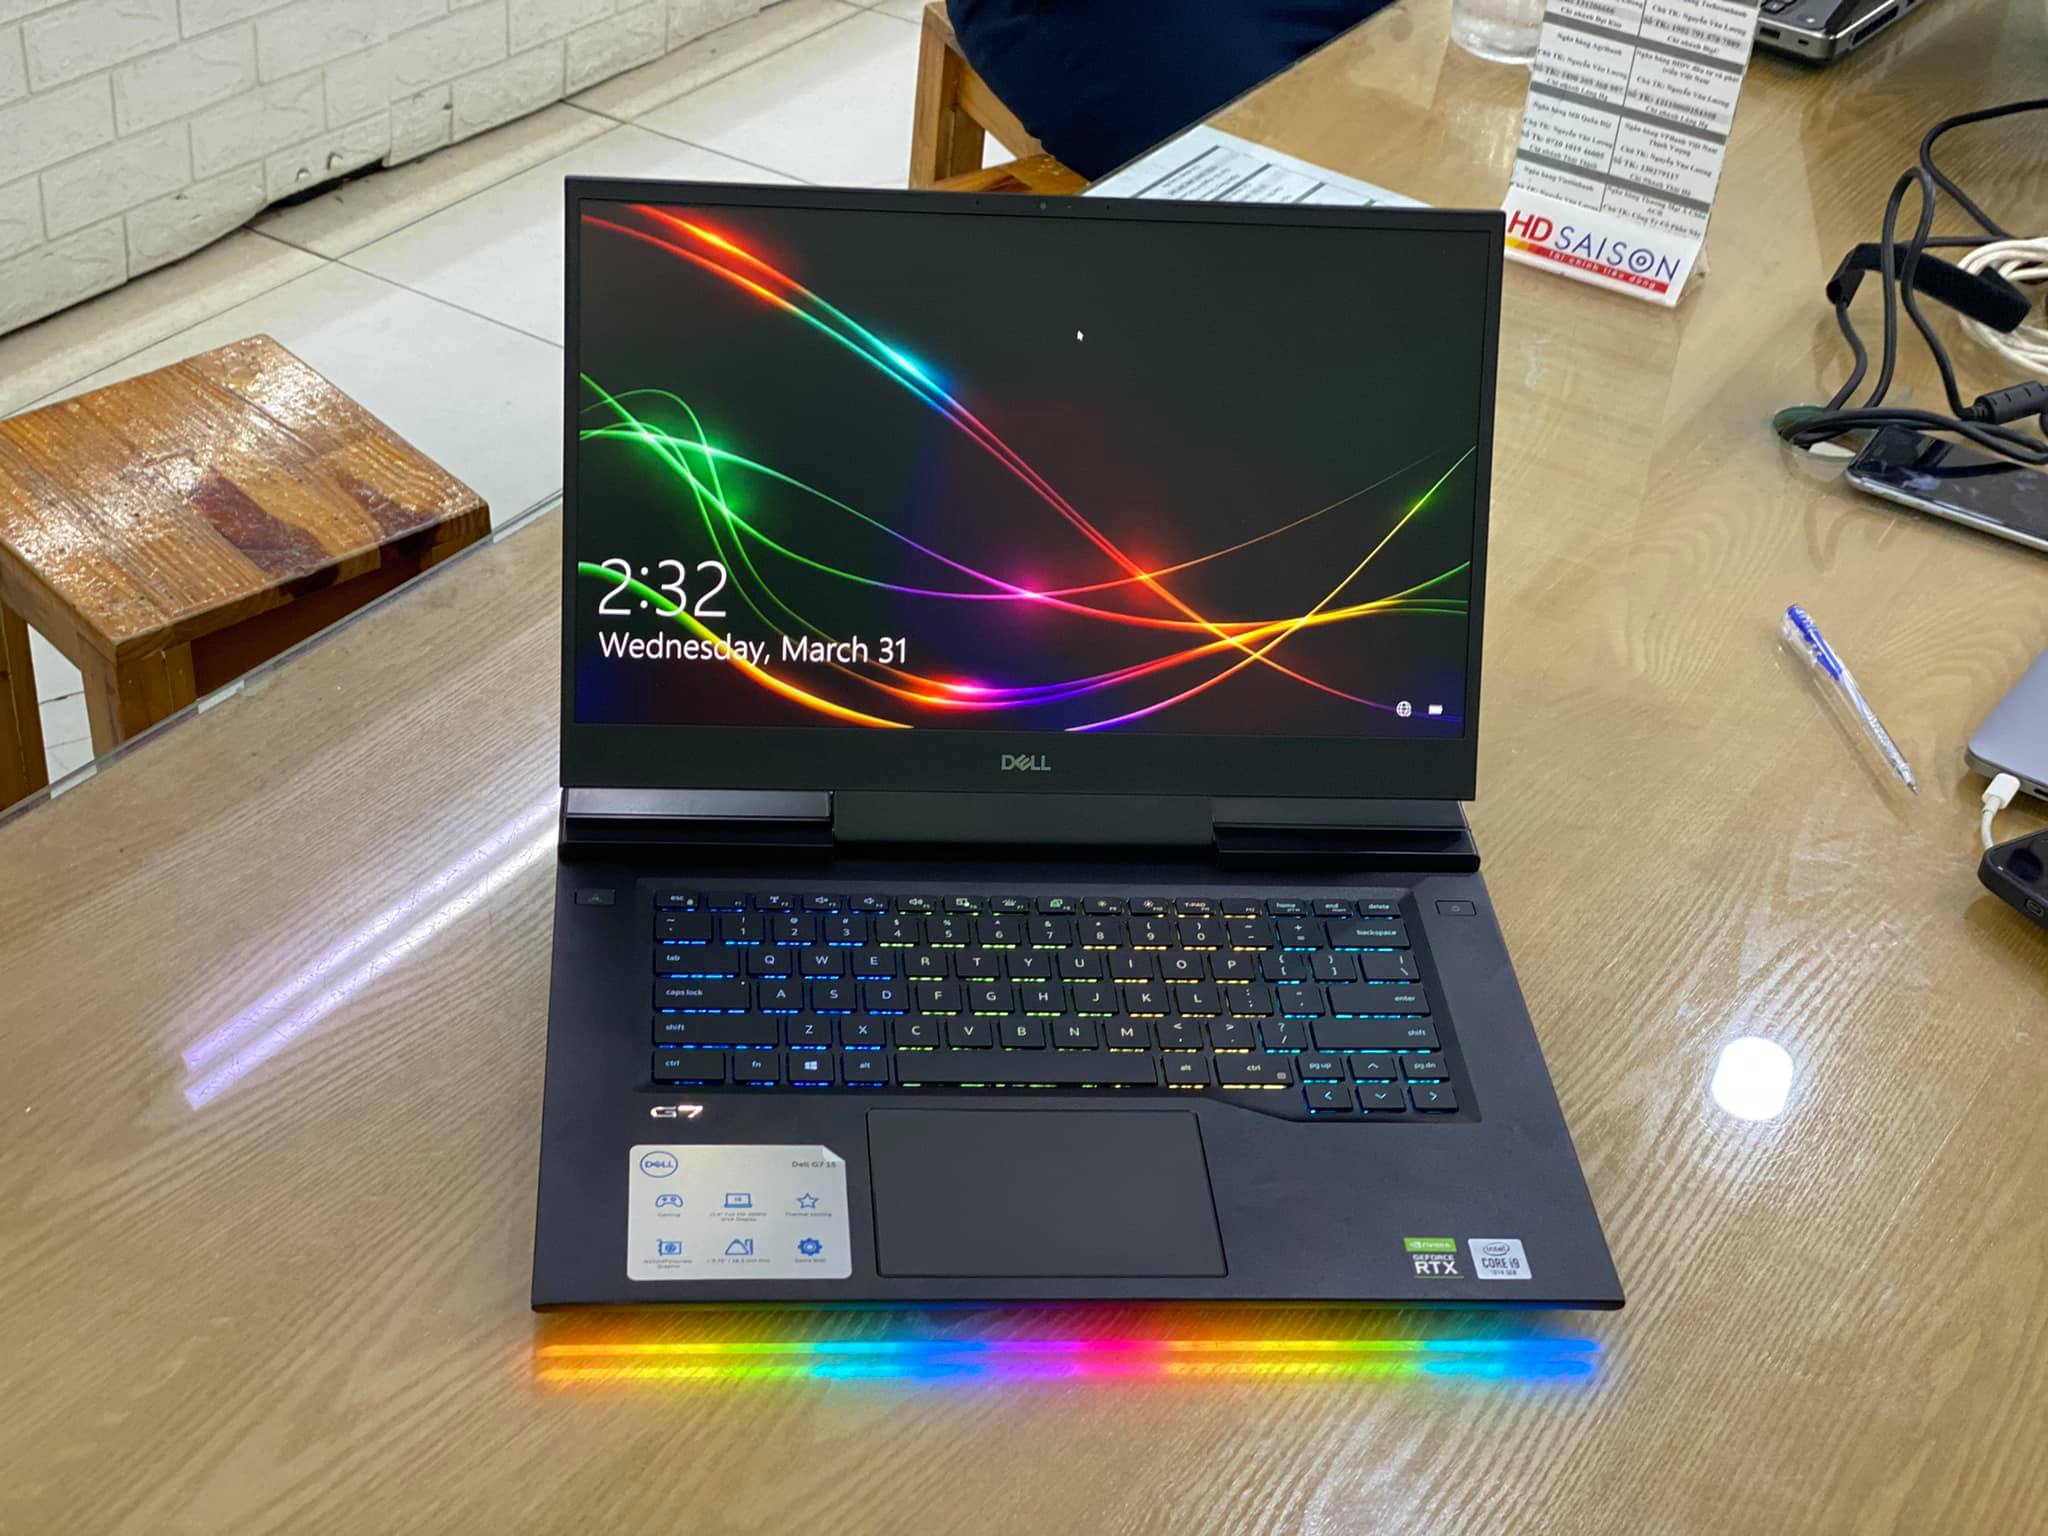 Dell Vostro G7 7500 Gaming Laptop Price in Pakistan